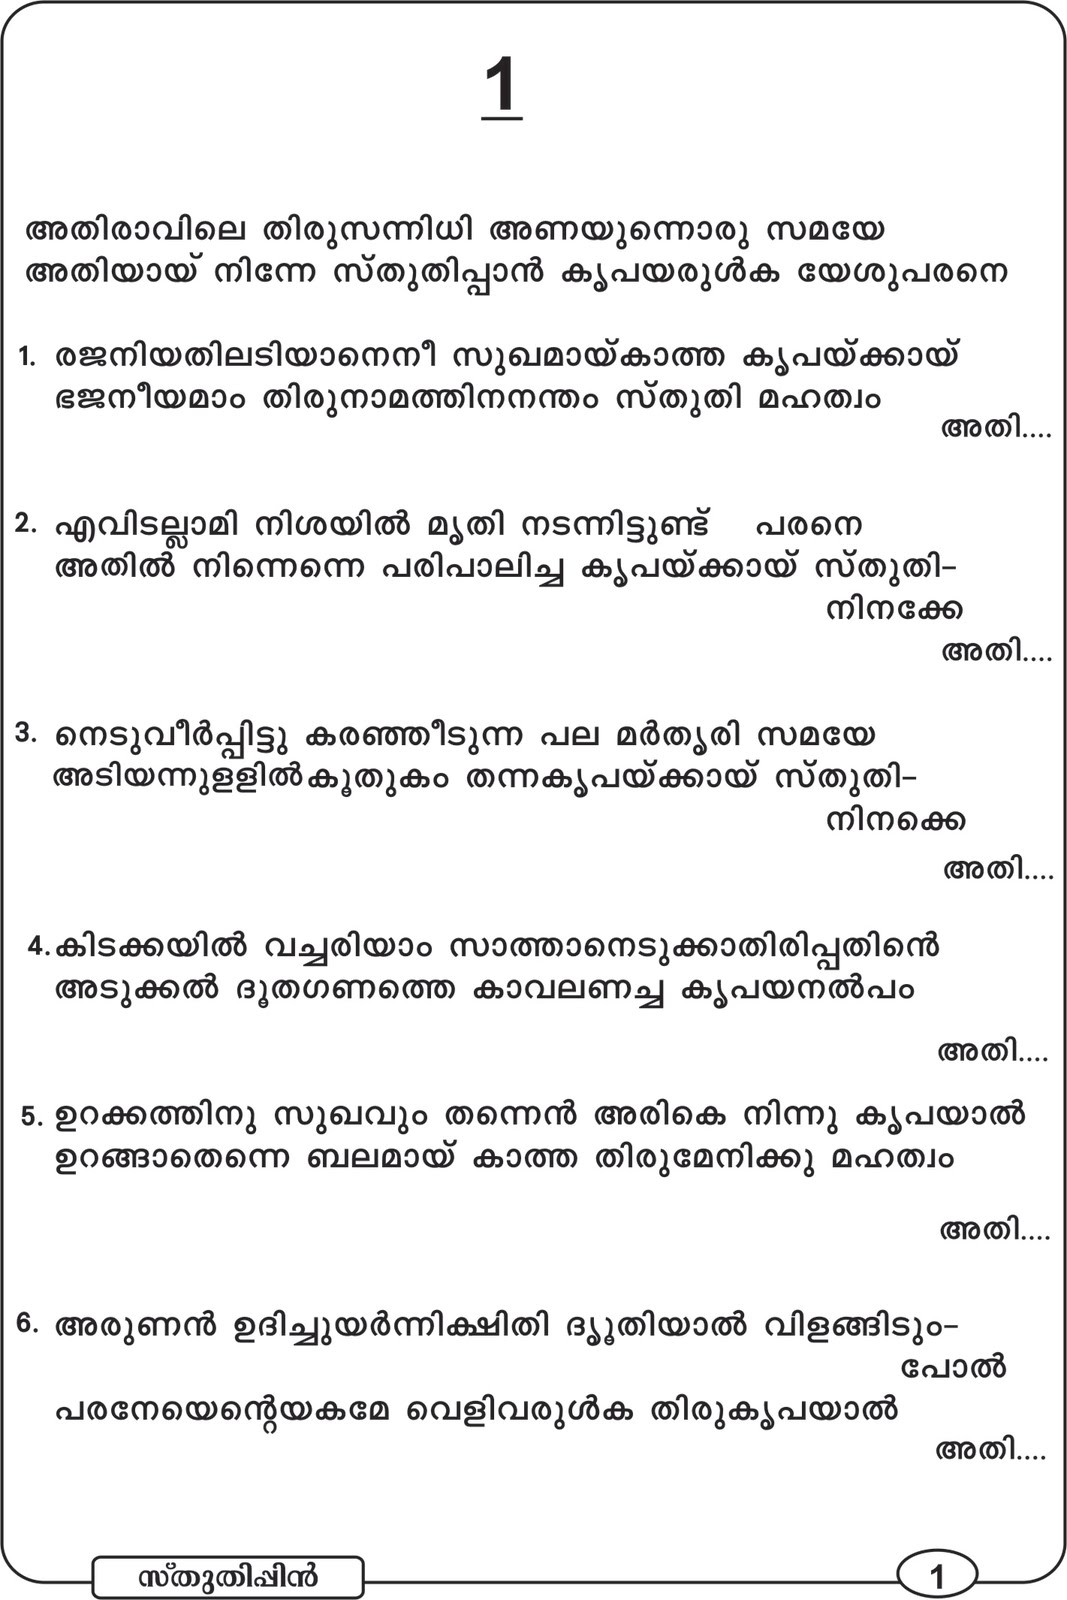 Malayalam Christian Worship Songs Pdf The download links for malayalam songs lyrics 1.15 are provided to you by soft112.com without any warranties, representations or guarantees of any kind, so download it at your own risk. malayalam christian worship songs pdf